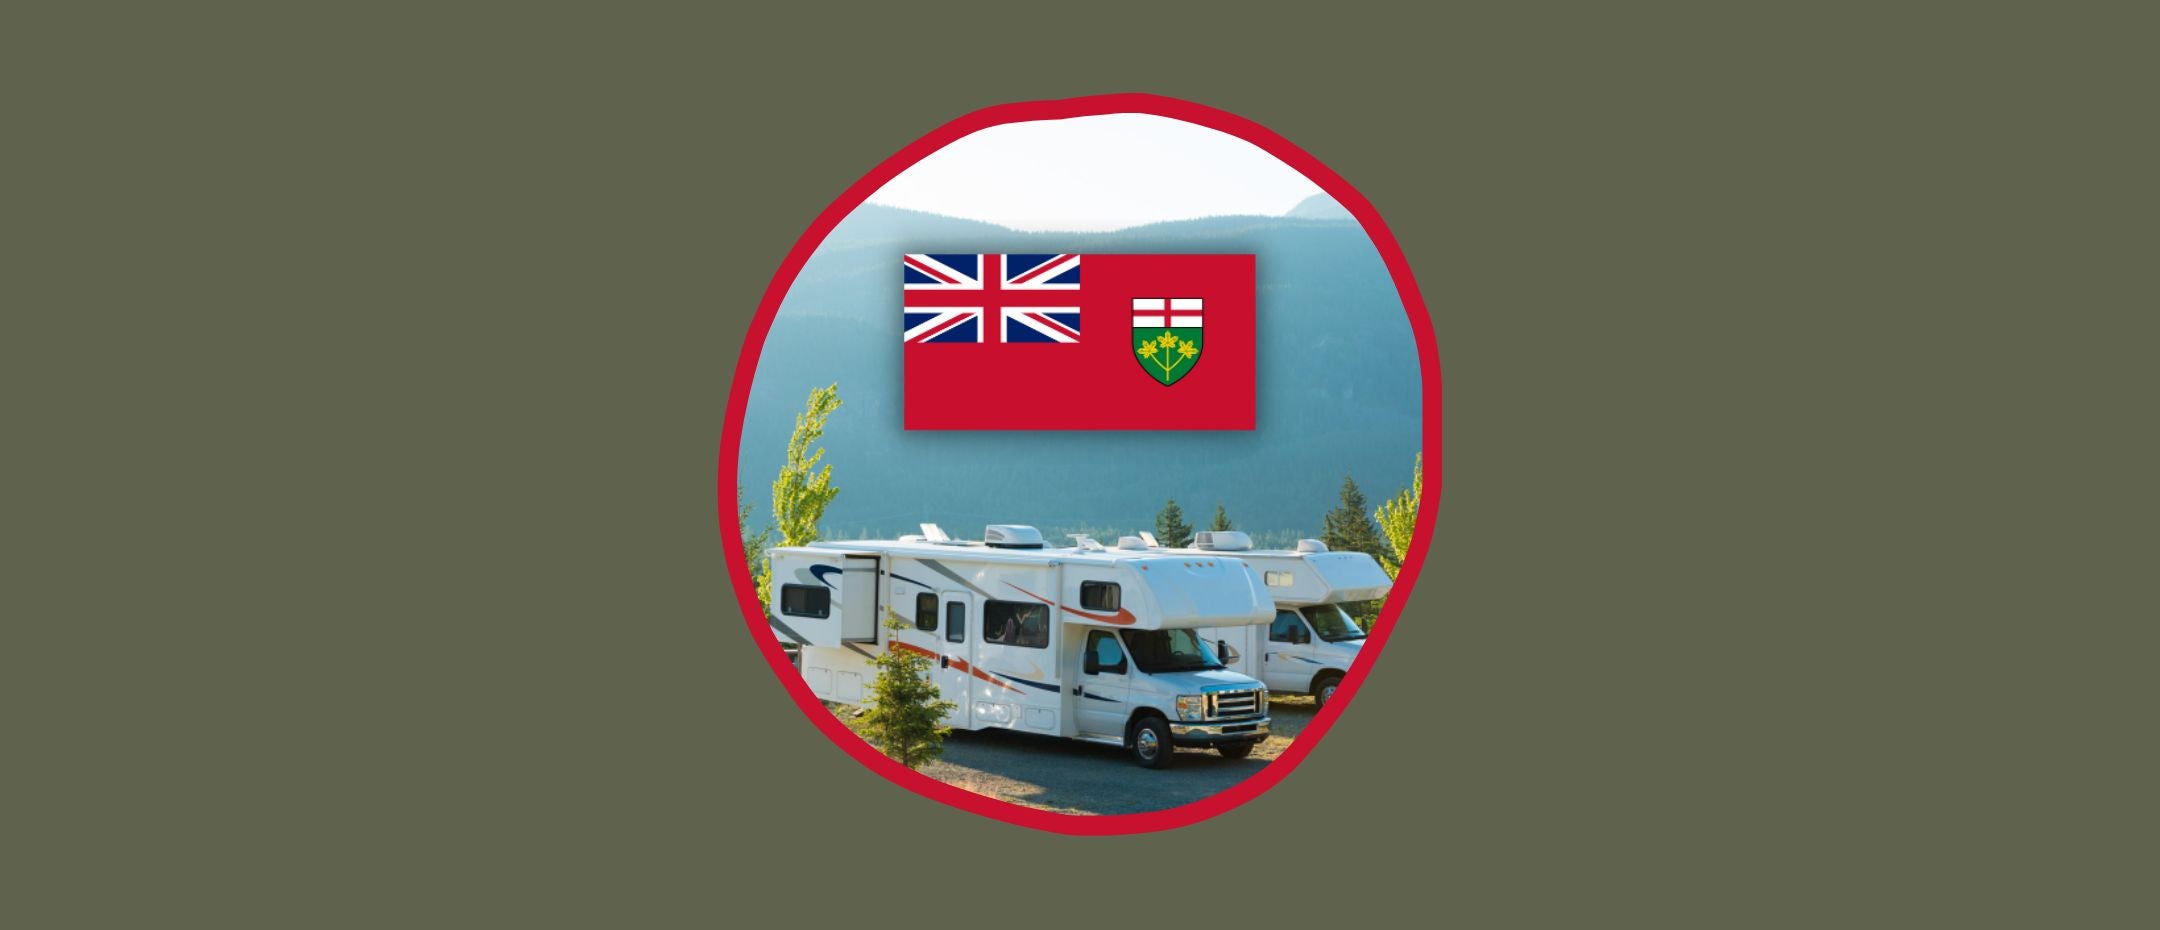 An RV campground featuring the Ontario flag